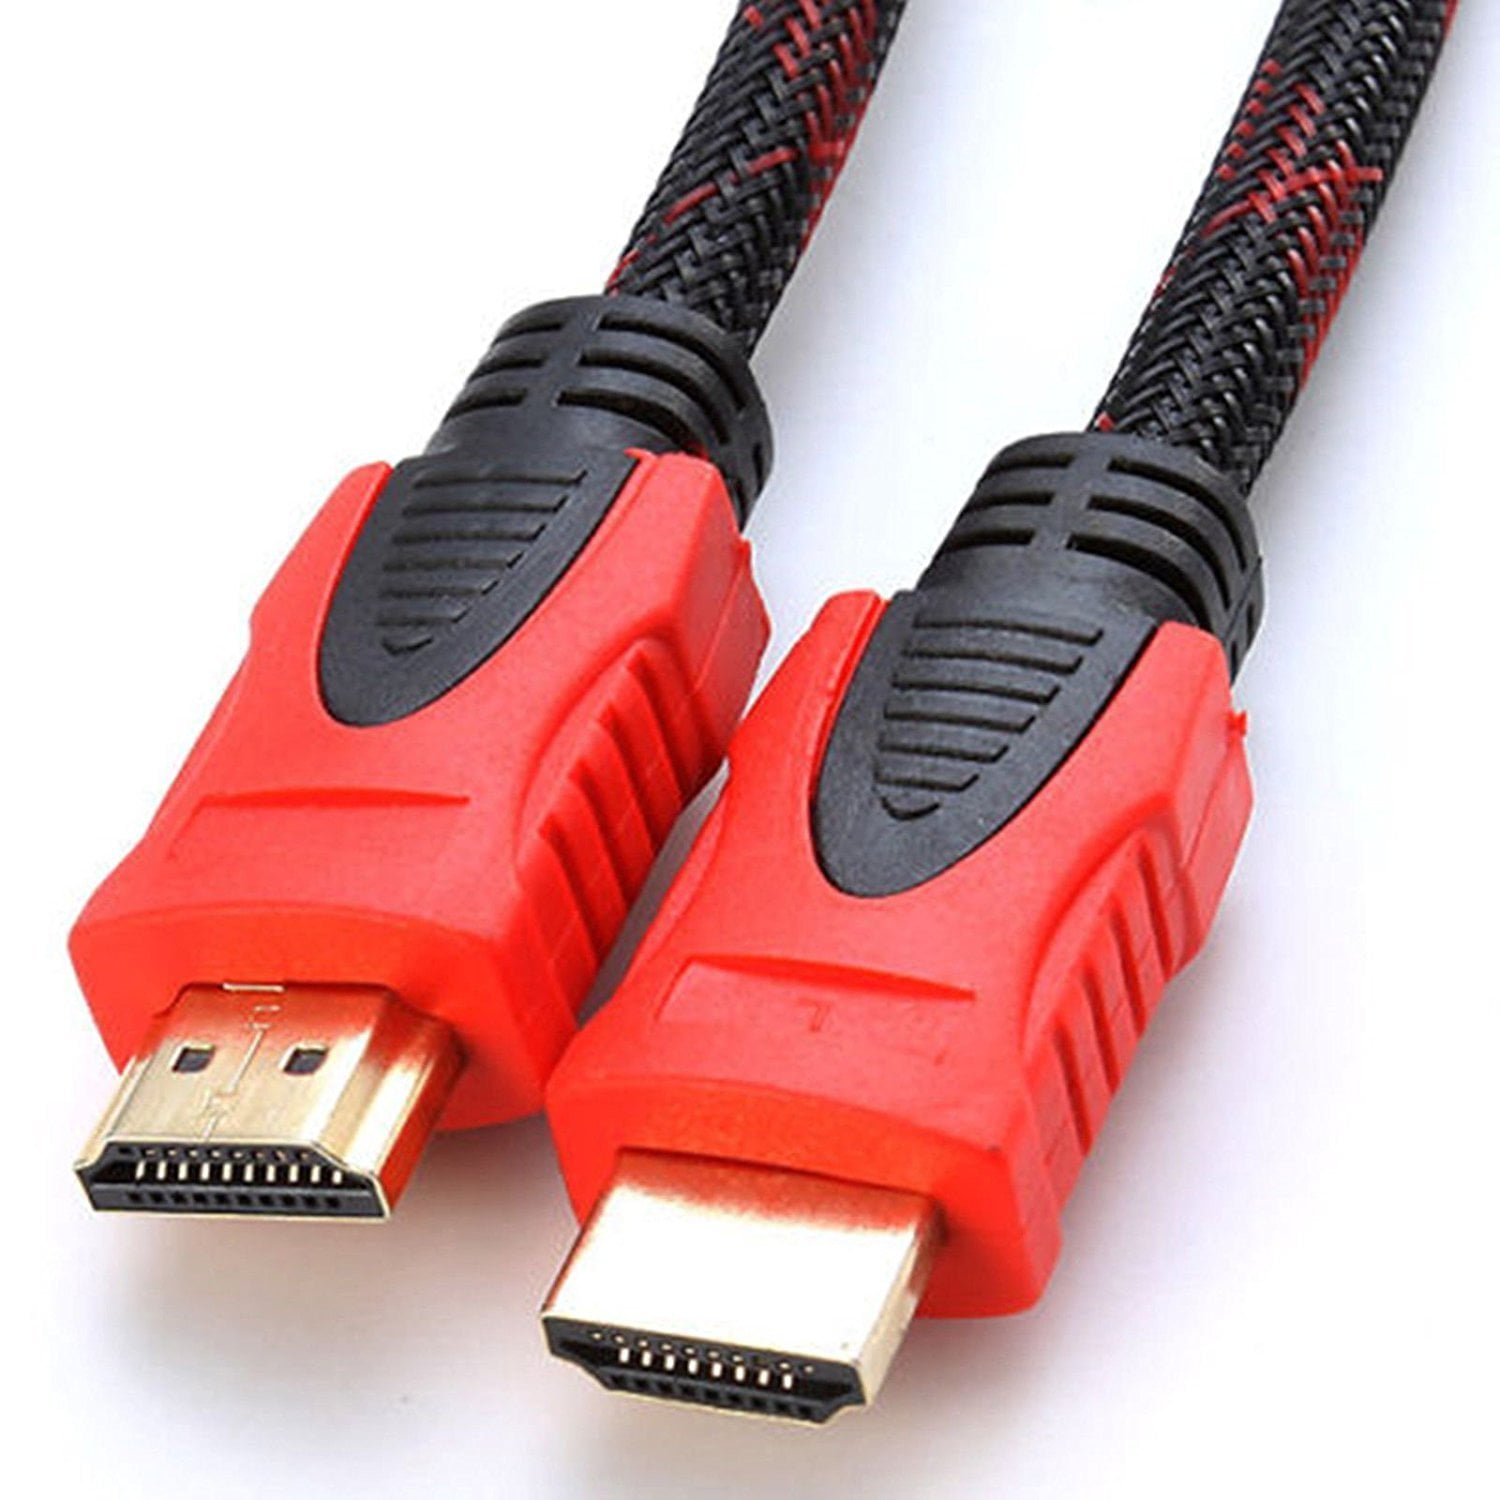 50FT 25FT 10FT Premium HDMI Cable Ethernet Audio-Video 1080P For HDTV XBOX PC